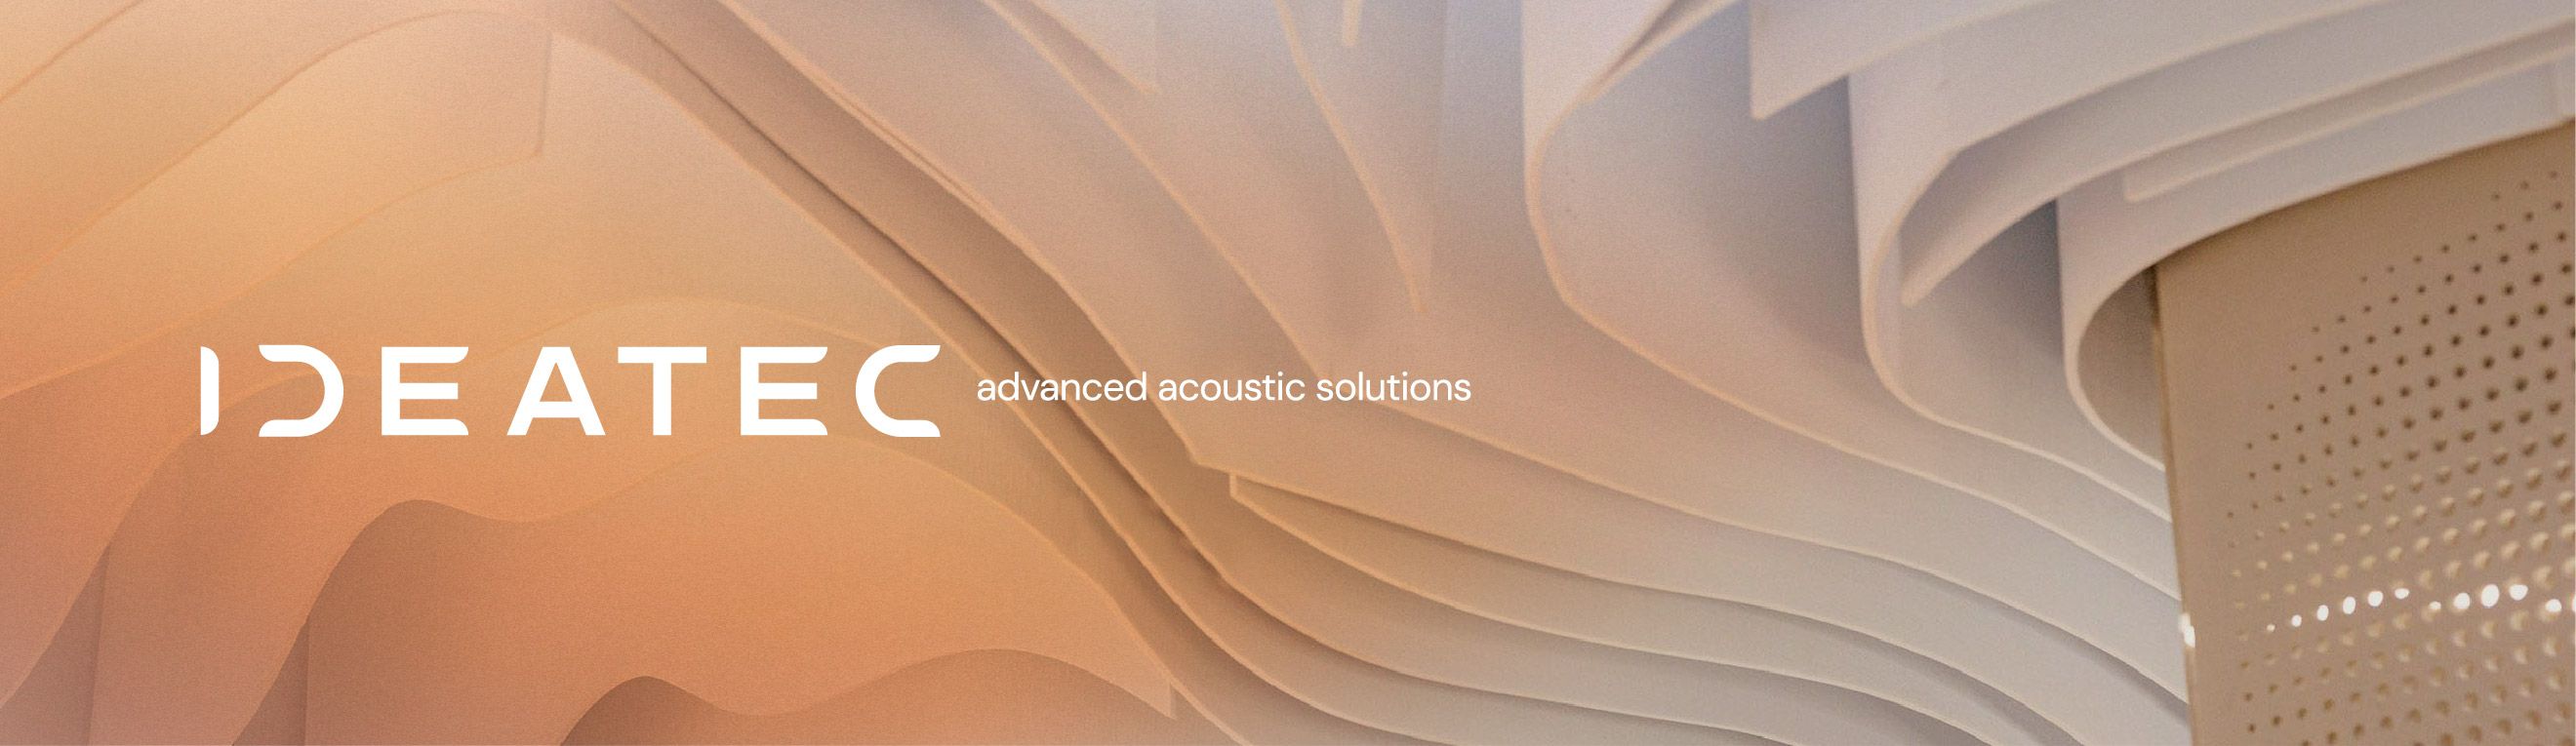 Ideatec Advanced Acoustic Solutions